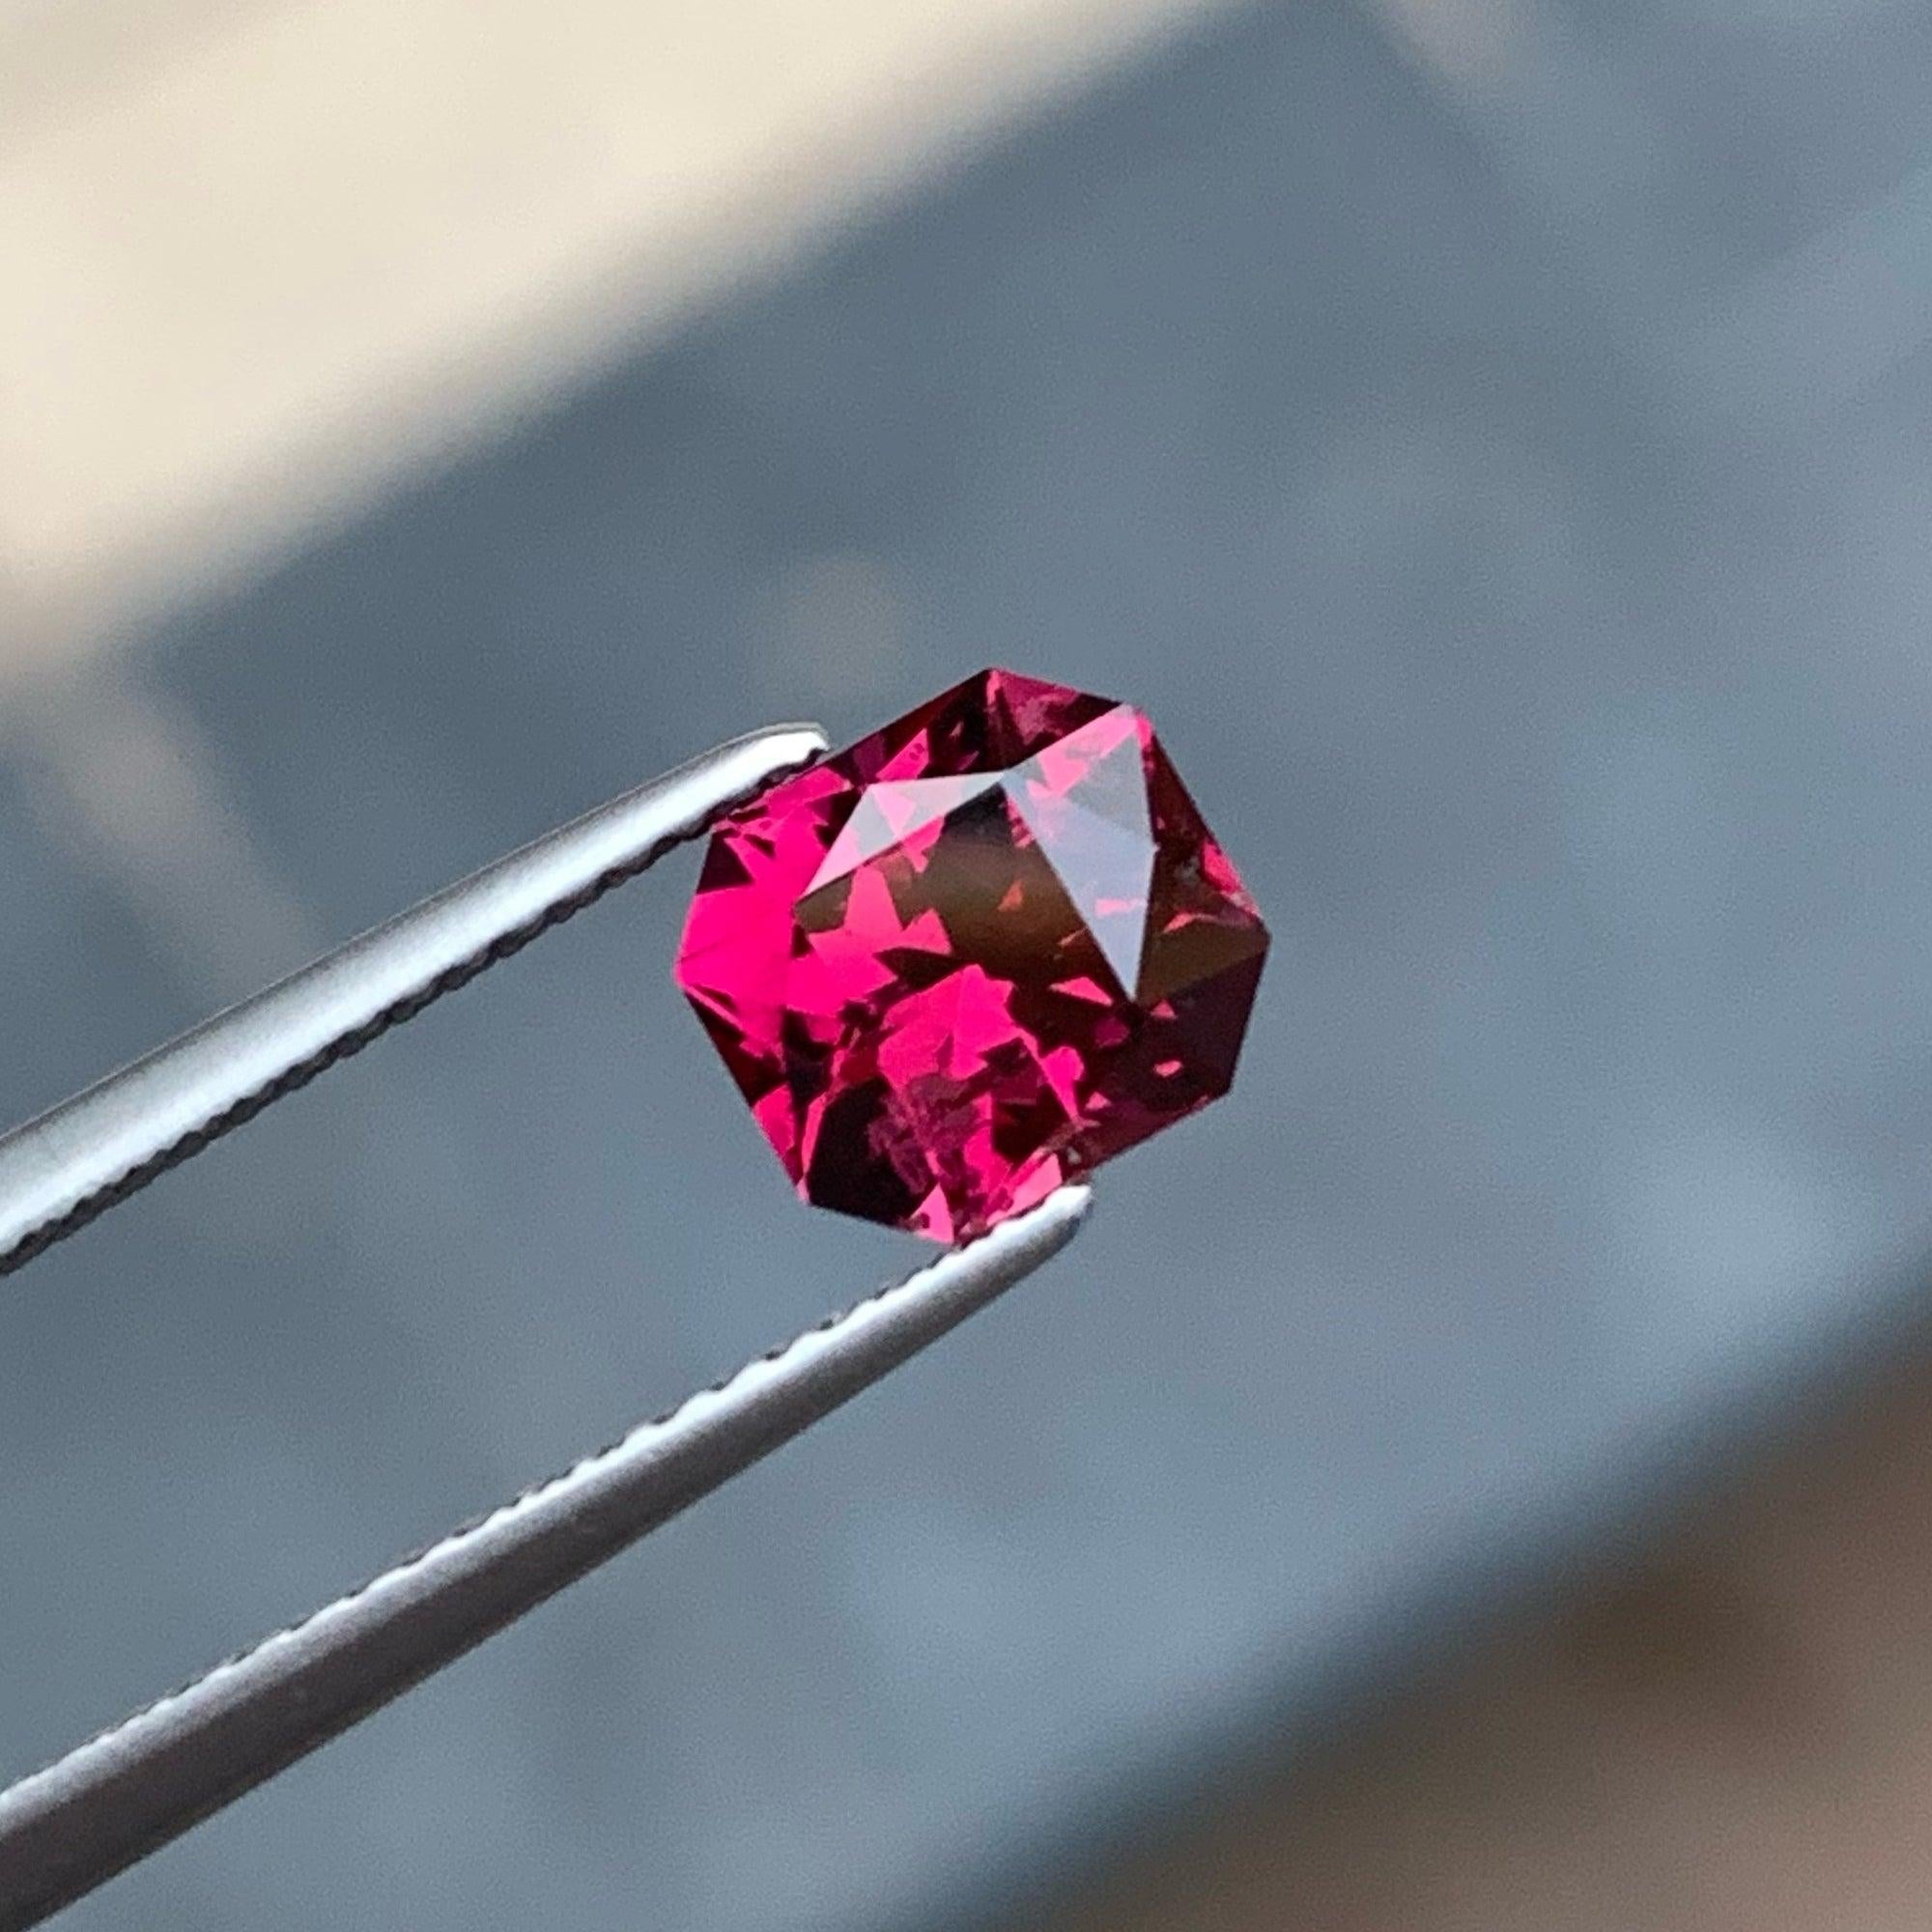 Fabulous Pinkish Red Natural Garnet Stone of 1.85 carats from Africa has a wonderful cut in a Octagon shape, incredible Pink color, Great brilliance. This gem is SI Clarity.

Product Information:
GEMSTONE NAME: Fabulous Pinkish Red Natural Garnet